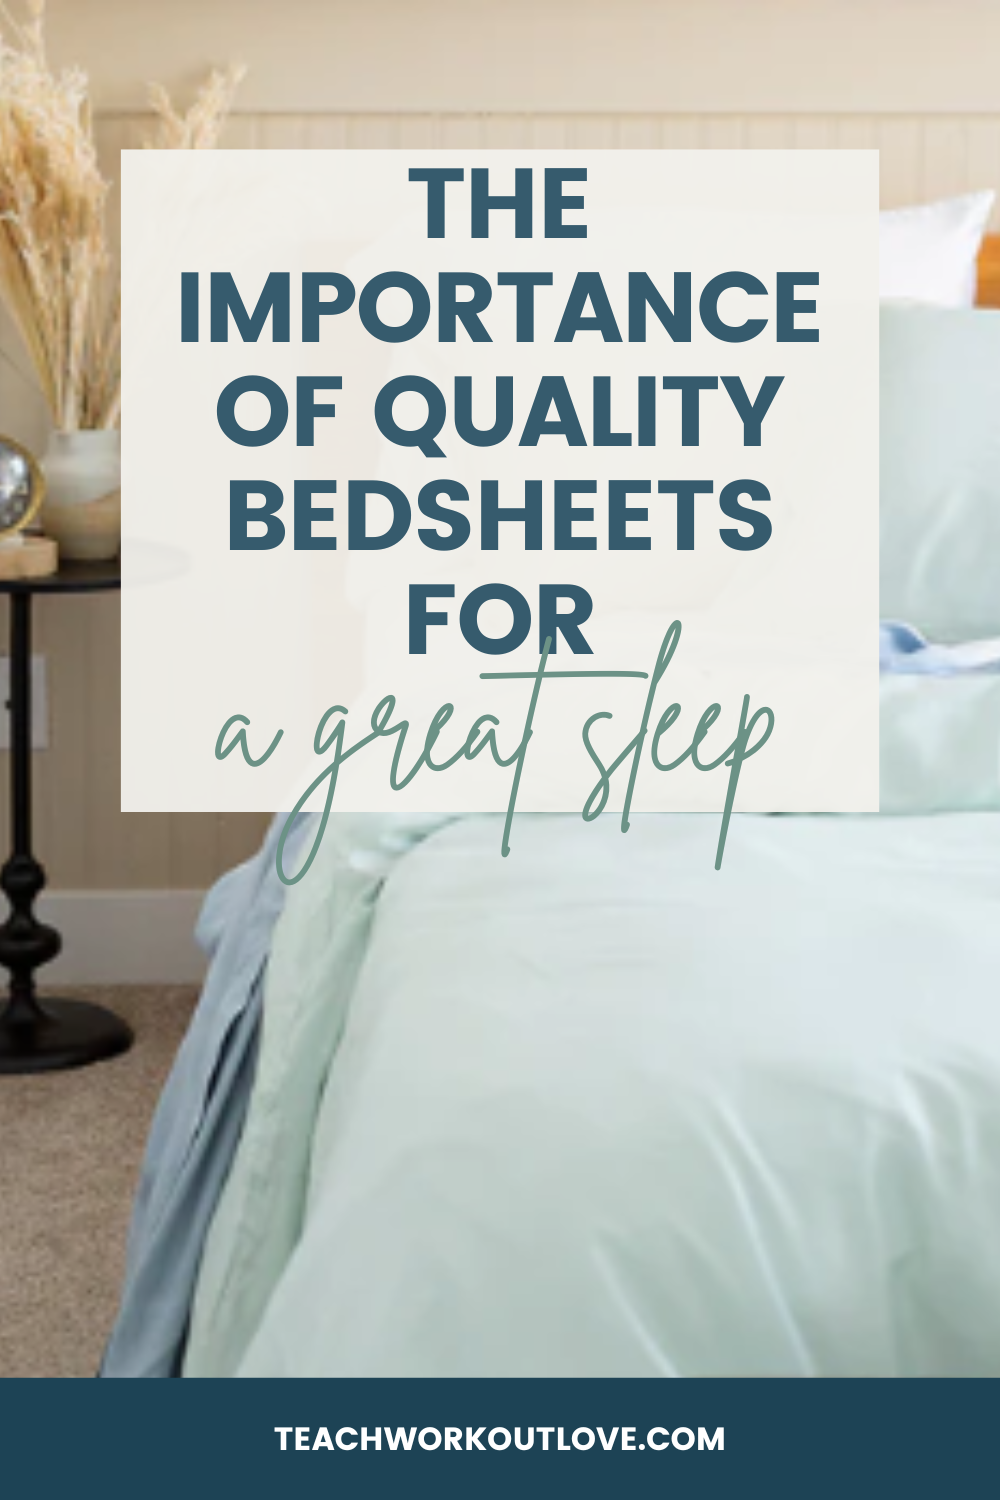 Several aspects contribute to a good Night's sleep, and the quality and hygiene of bedsheets are a major and overlooked one. There are different aspects of bedsheets that may make or break your sleep.